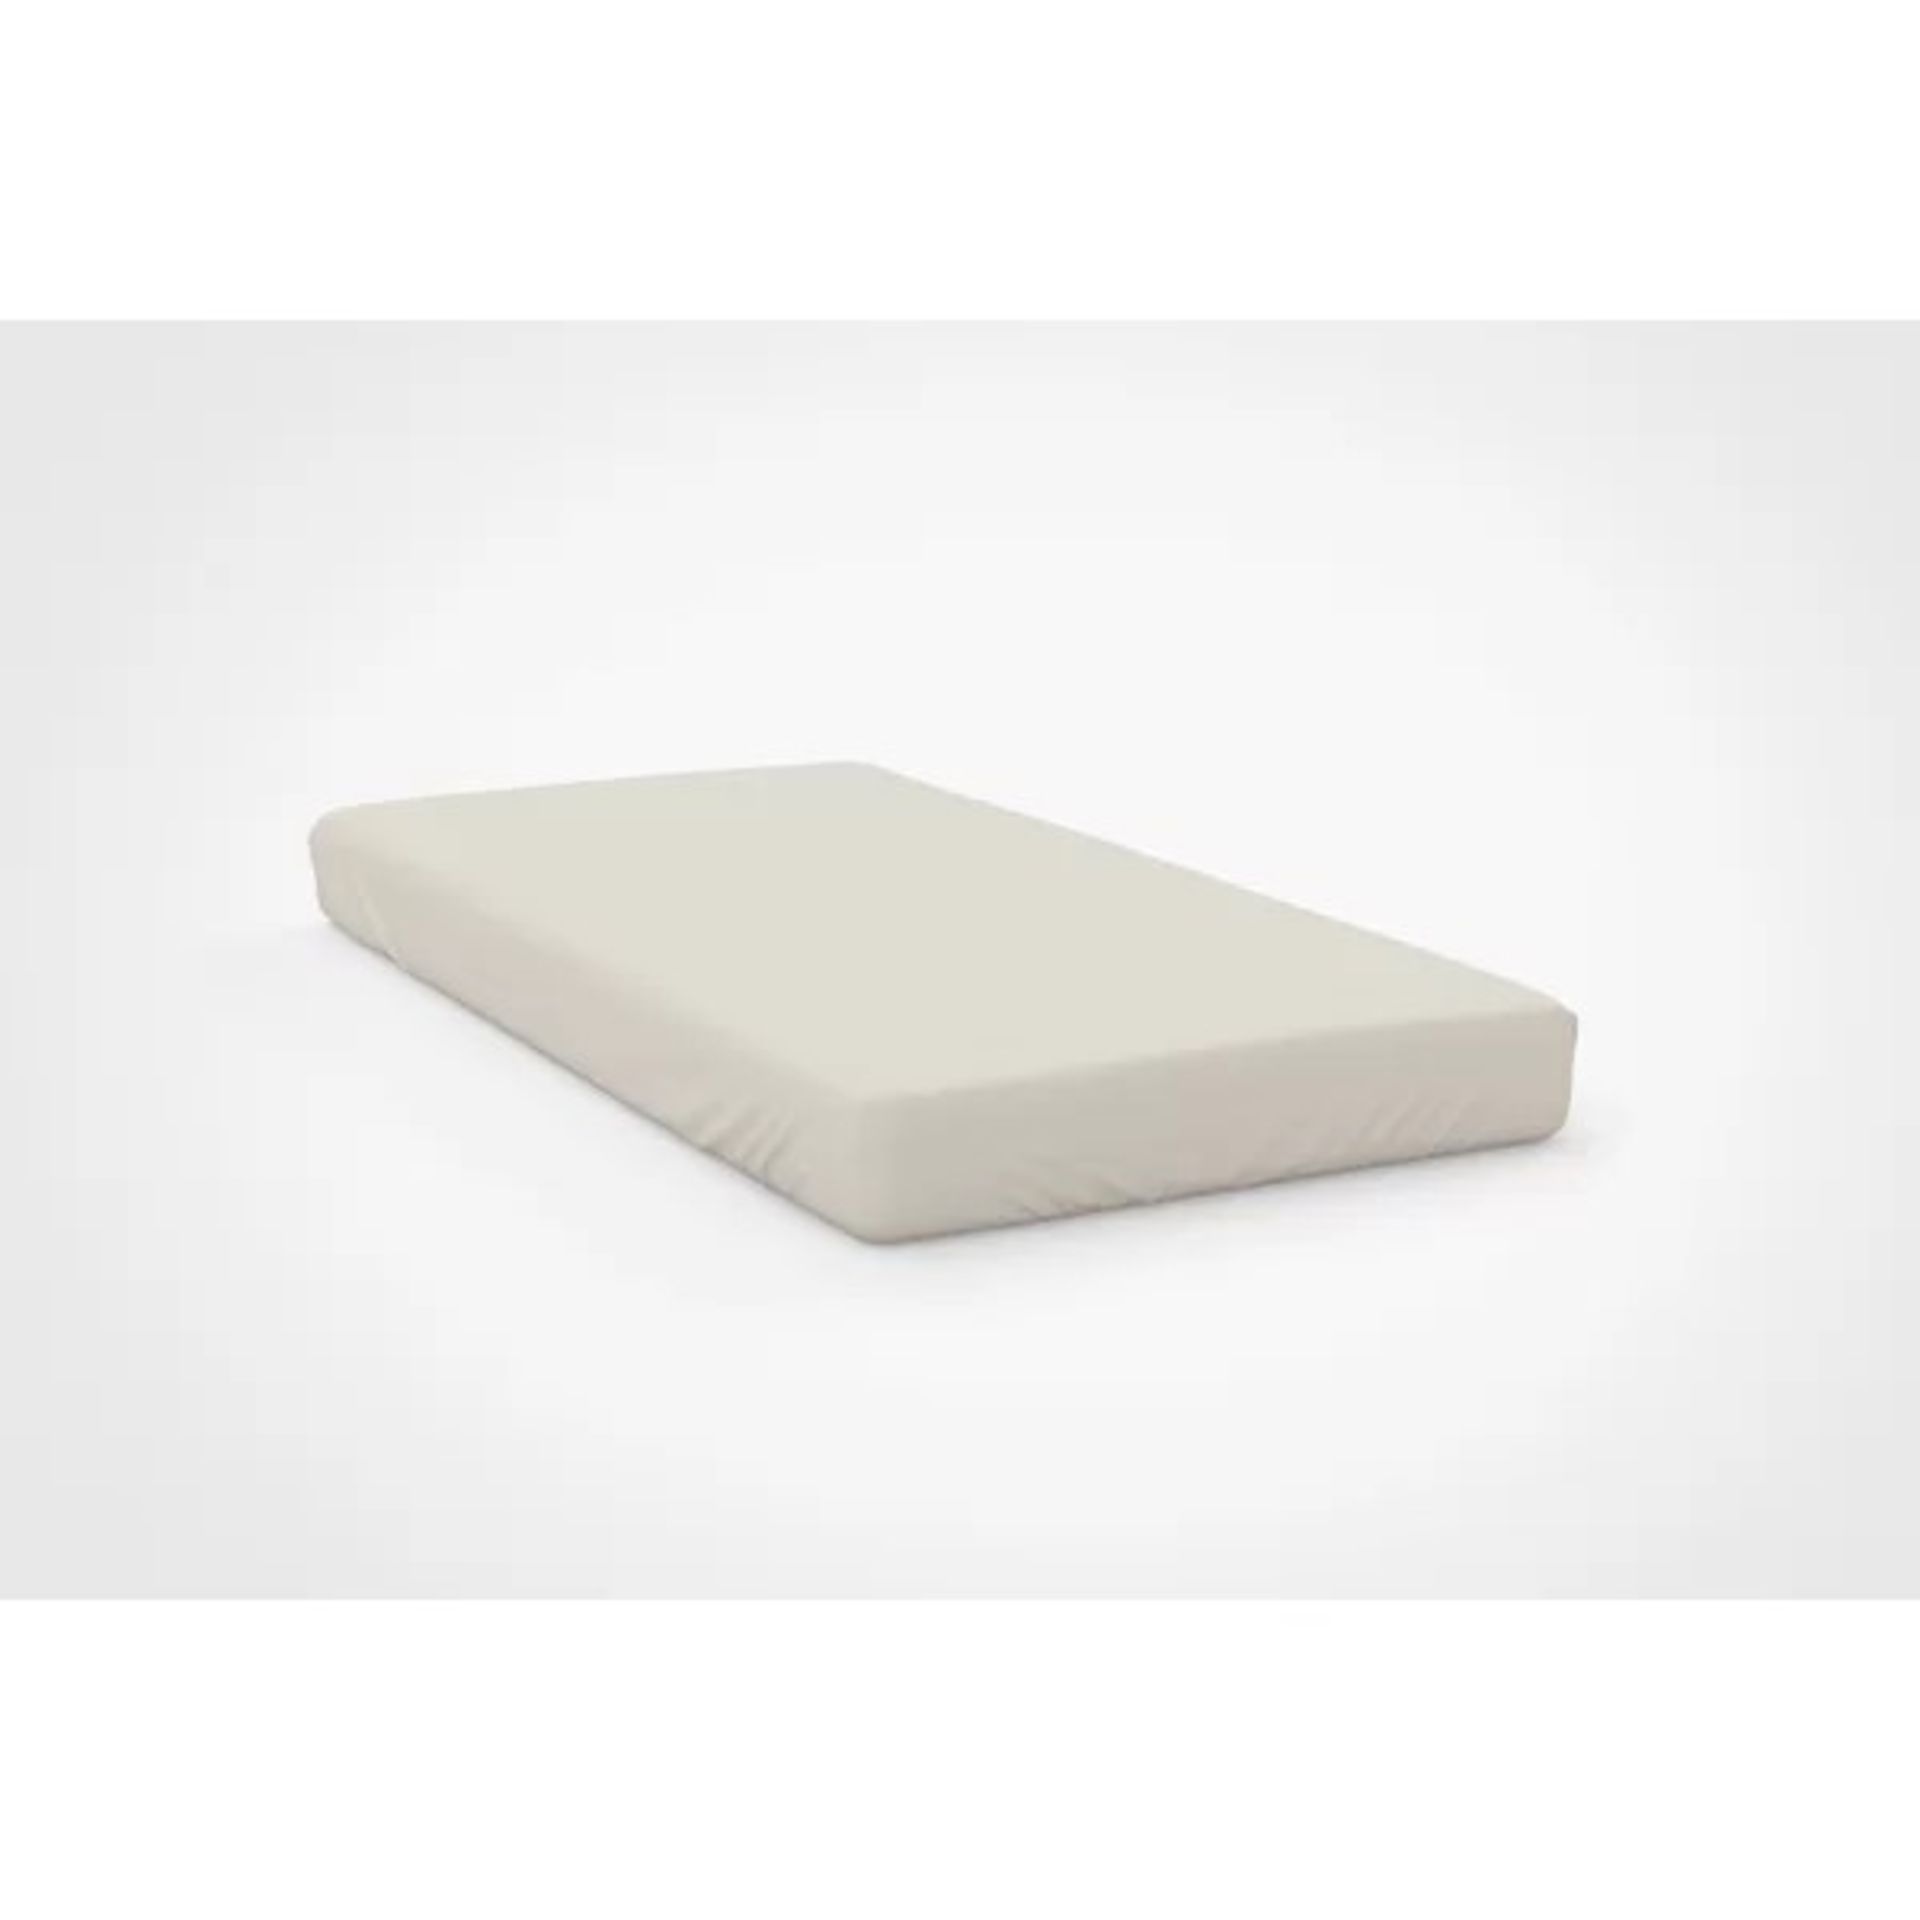 RRP £25 - 200 TC 50/50 Percale Polycotton Fitted Sheet - Size: Kingsize (5'), Colour: Ivory